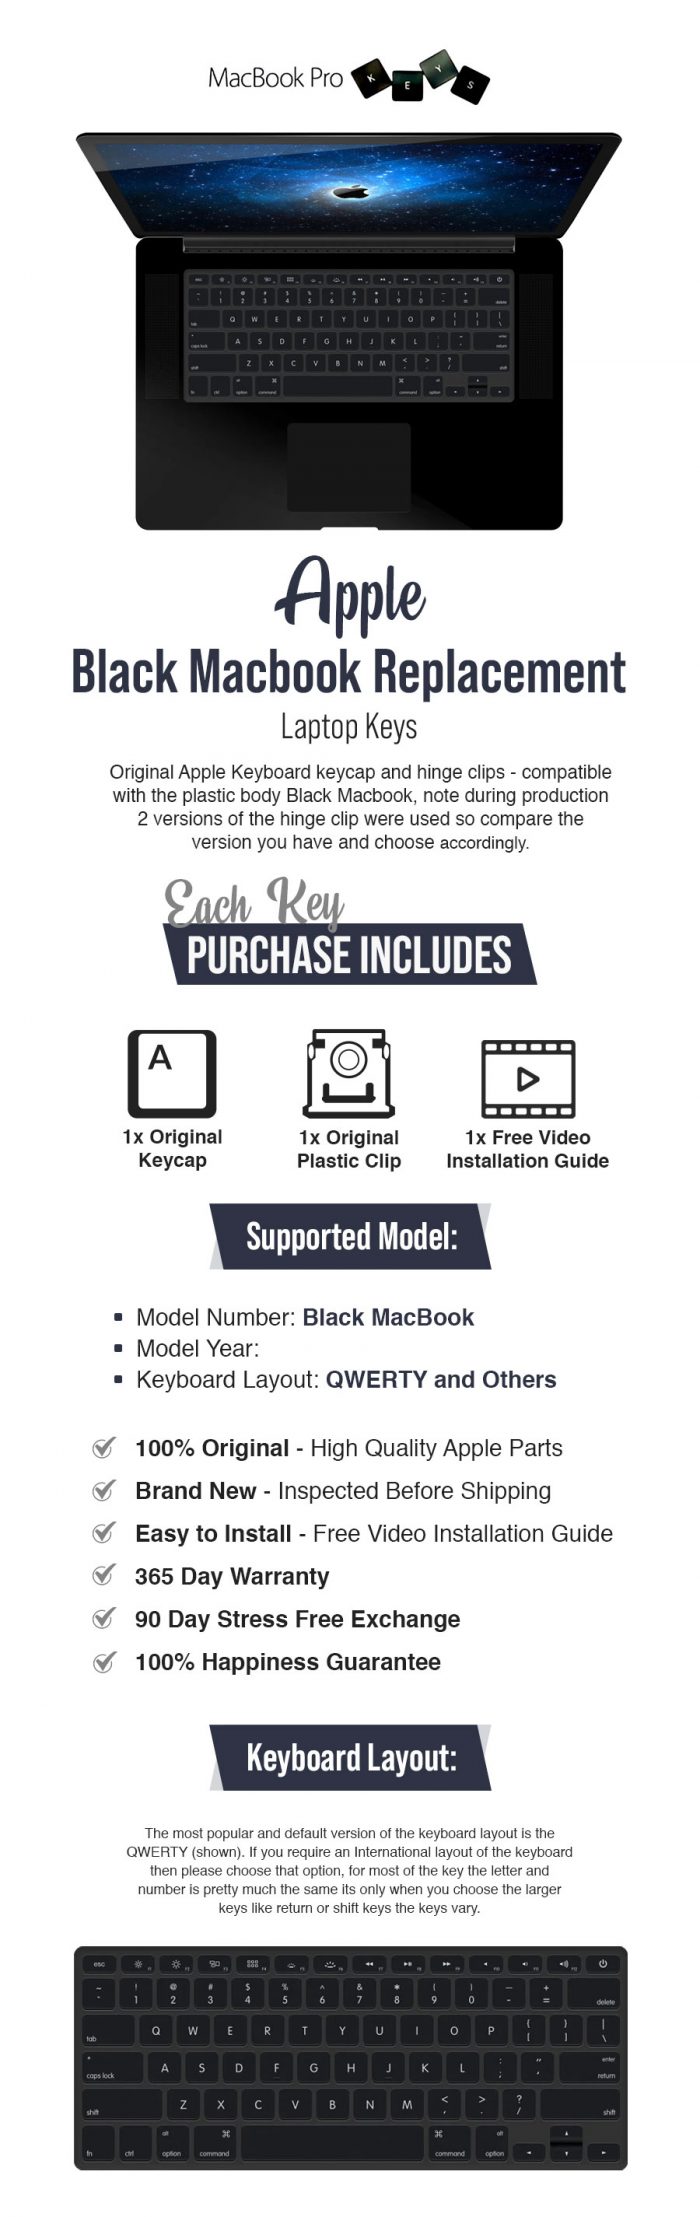 Get the Top-Quality Apple Black Macbook Replacement Keyboard Keys online from MBProkeys